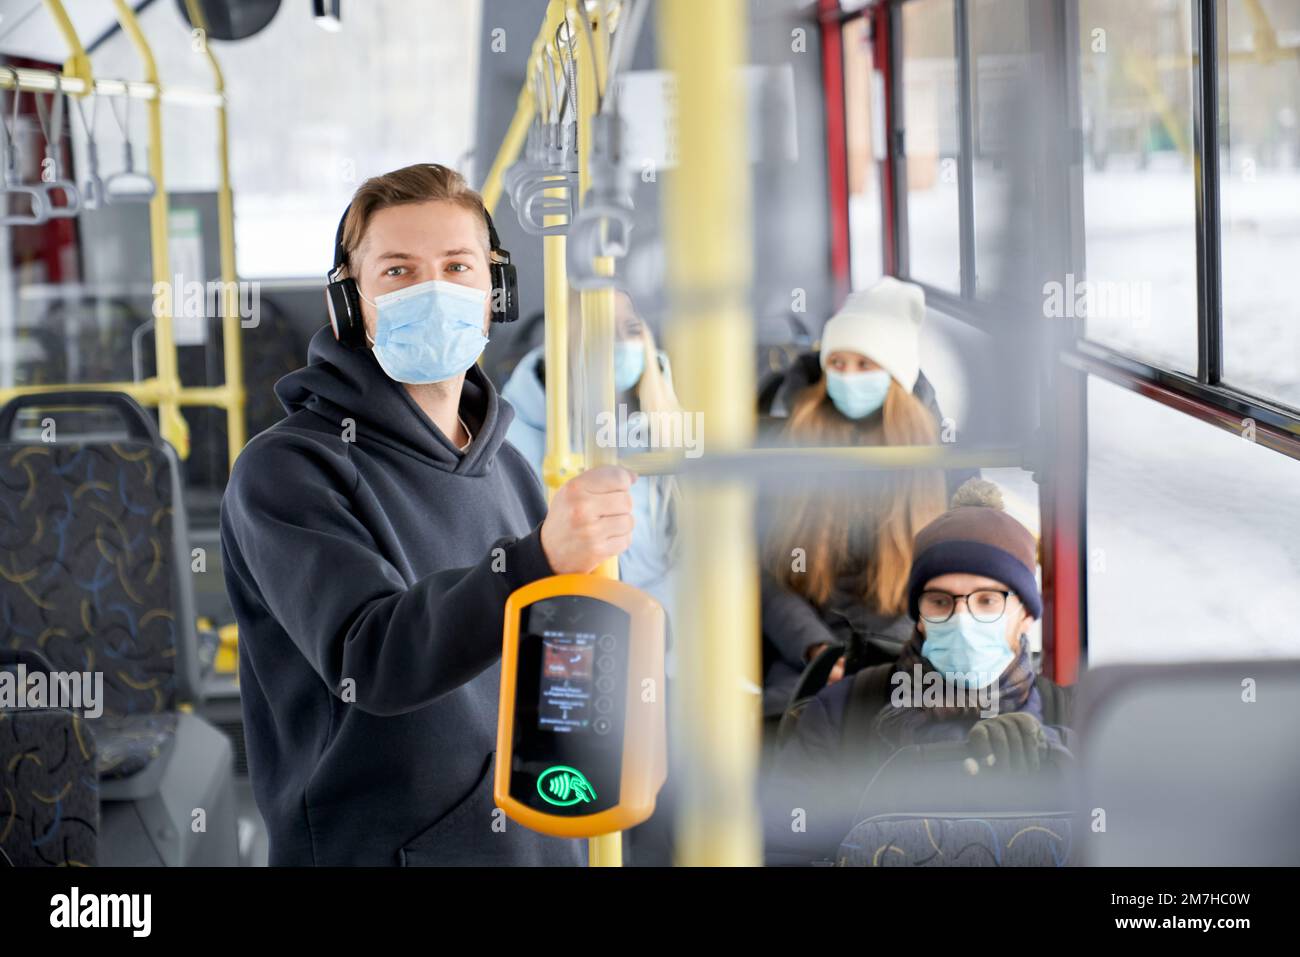 Side view of passengers standing, sitting on public transport, wearing medical masks, protecting. Young man holding handle, listening to music. Concept of quarantine measures. Stock Photo